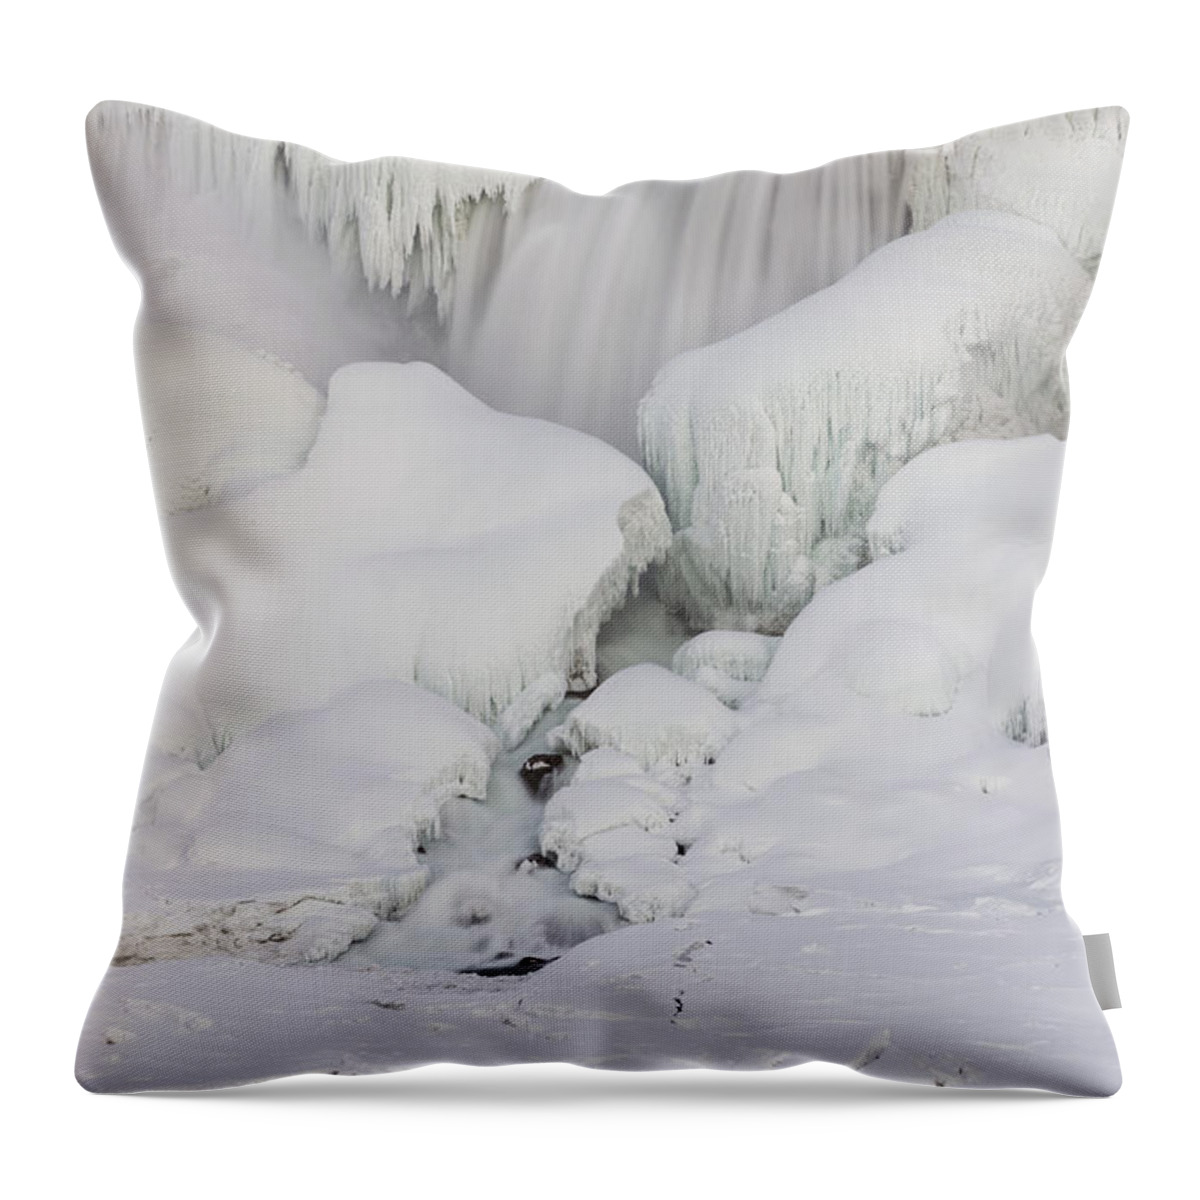 American Throw Pillow featuring the photograph Niagara Falls Frozen #2 by JT Lewis